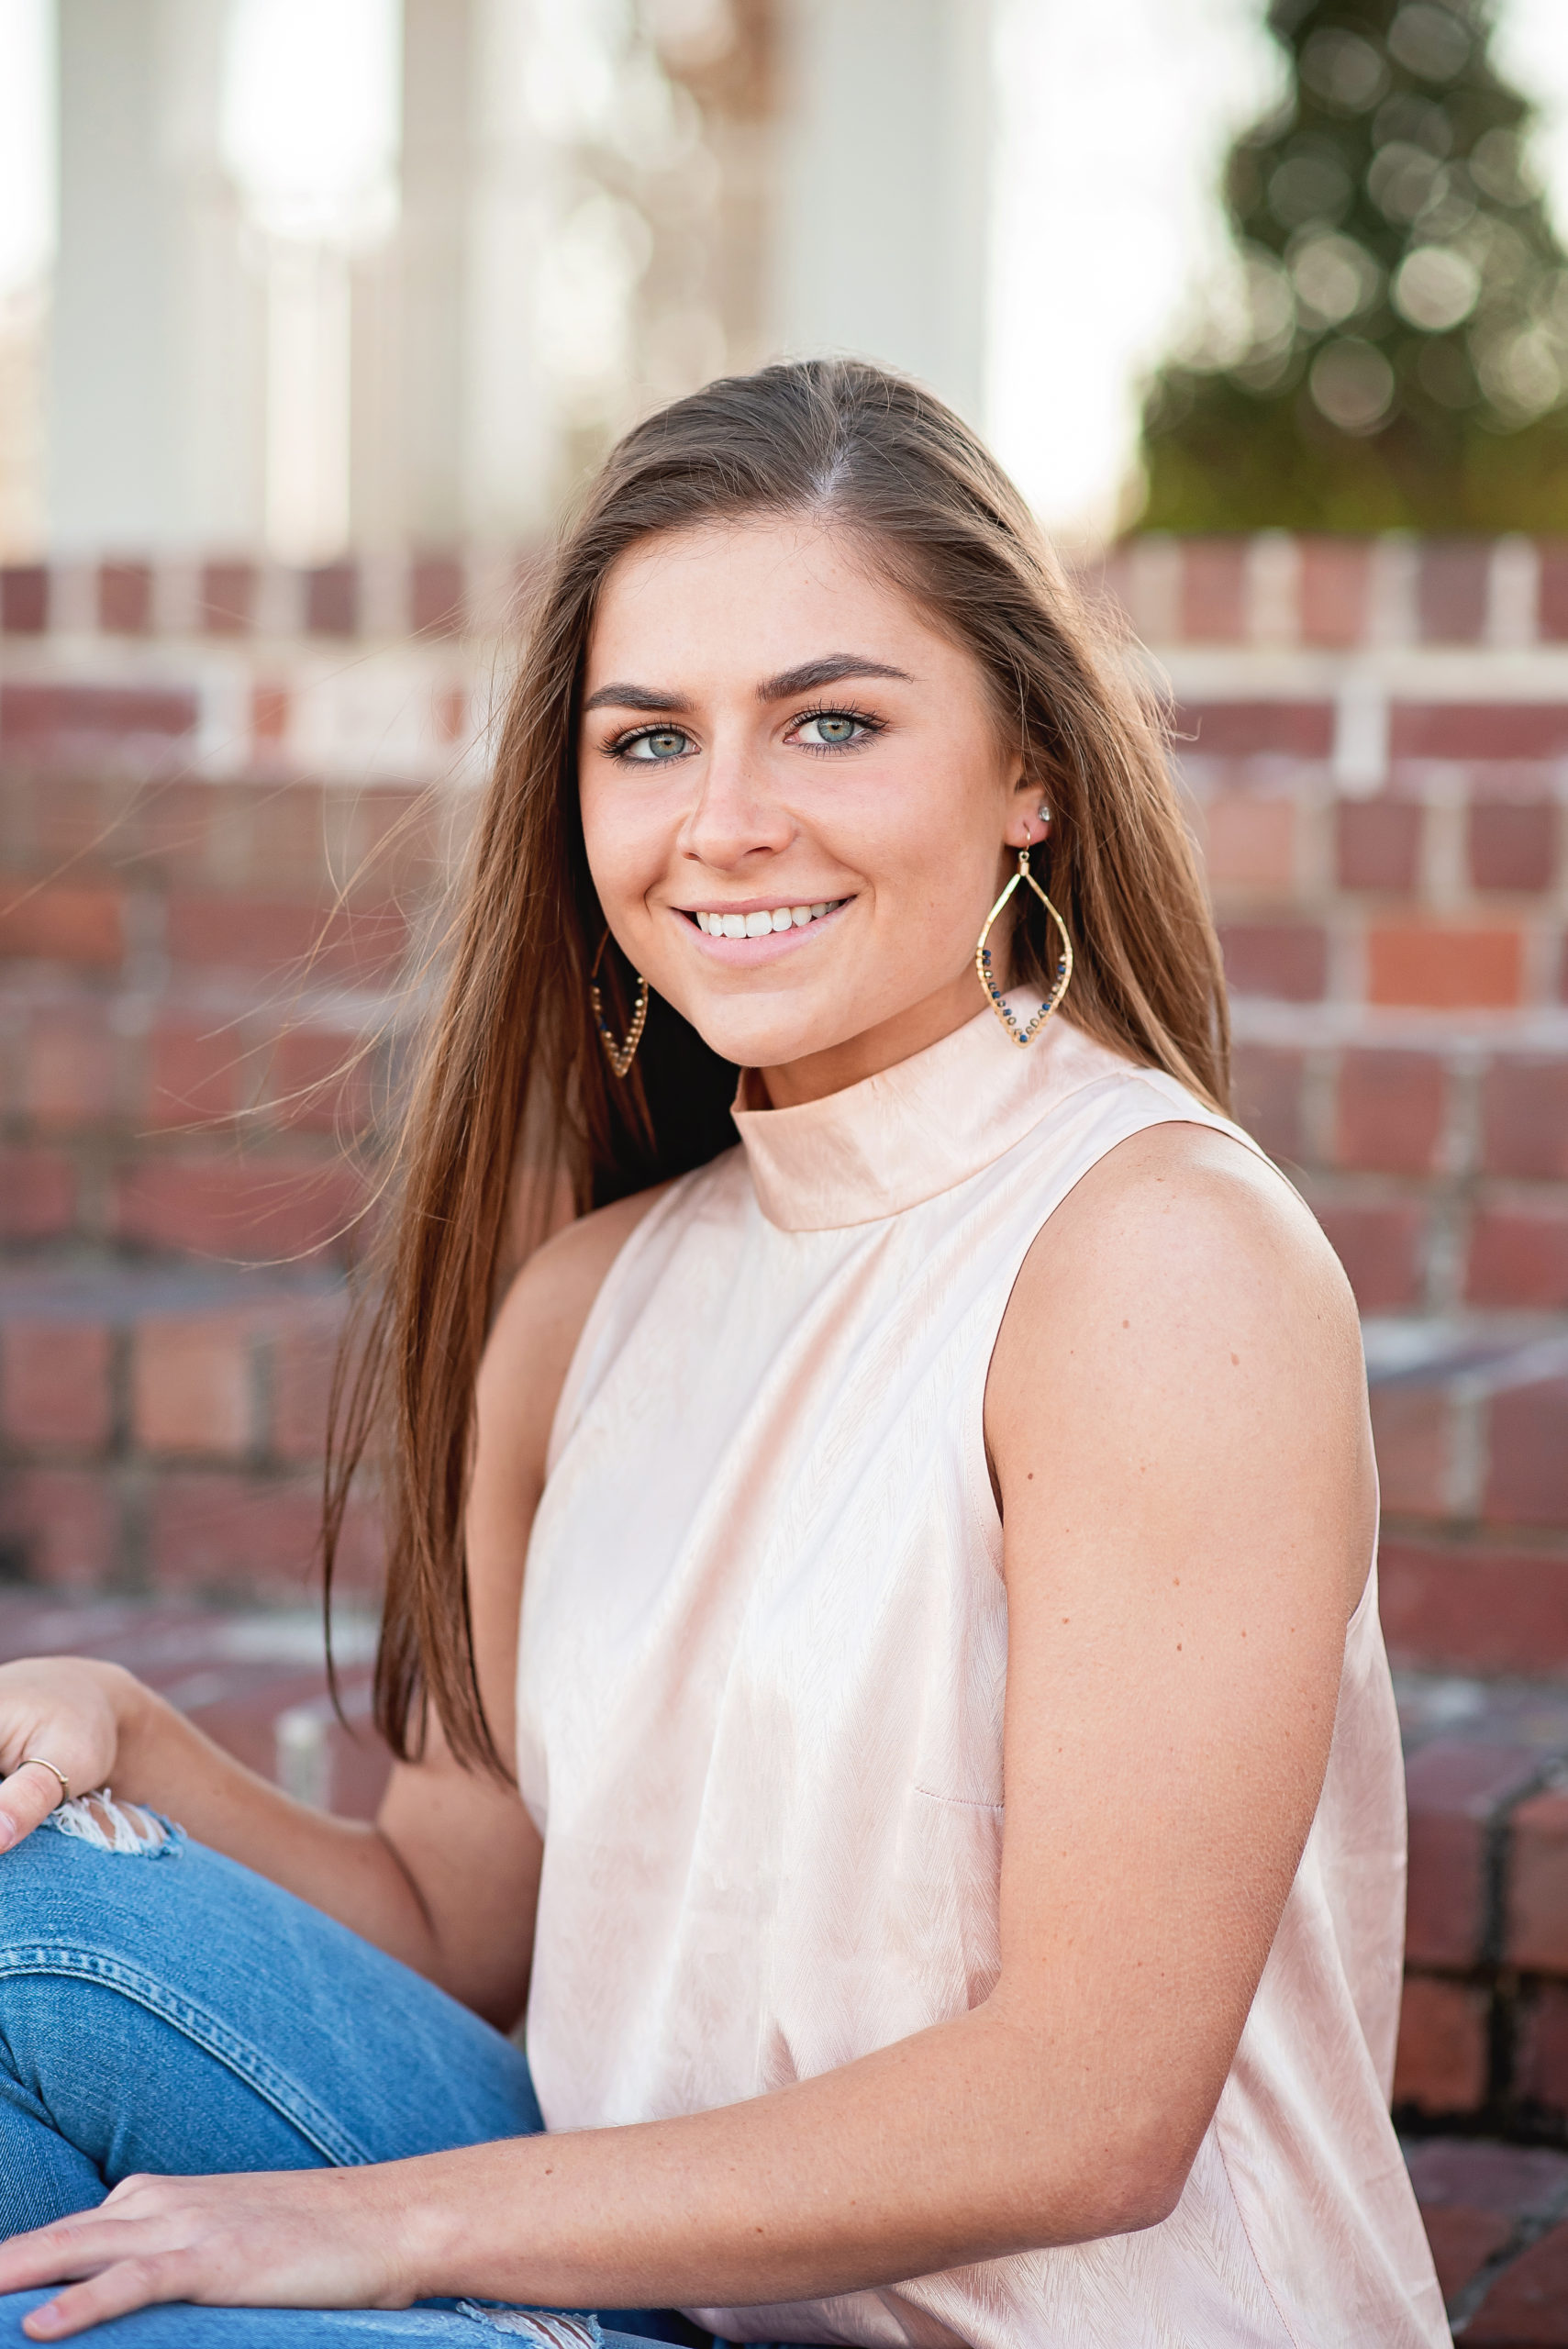 Senior portraits in The woodlands tx